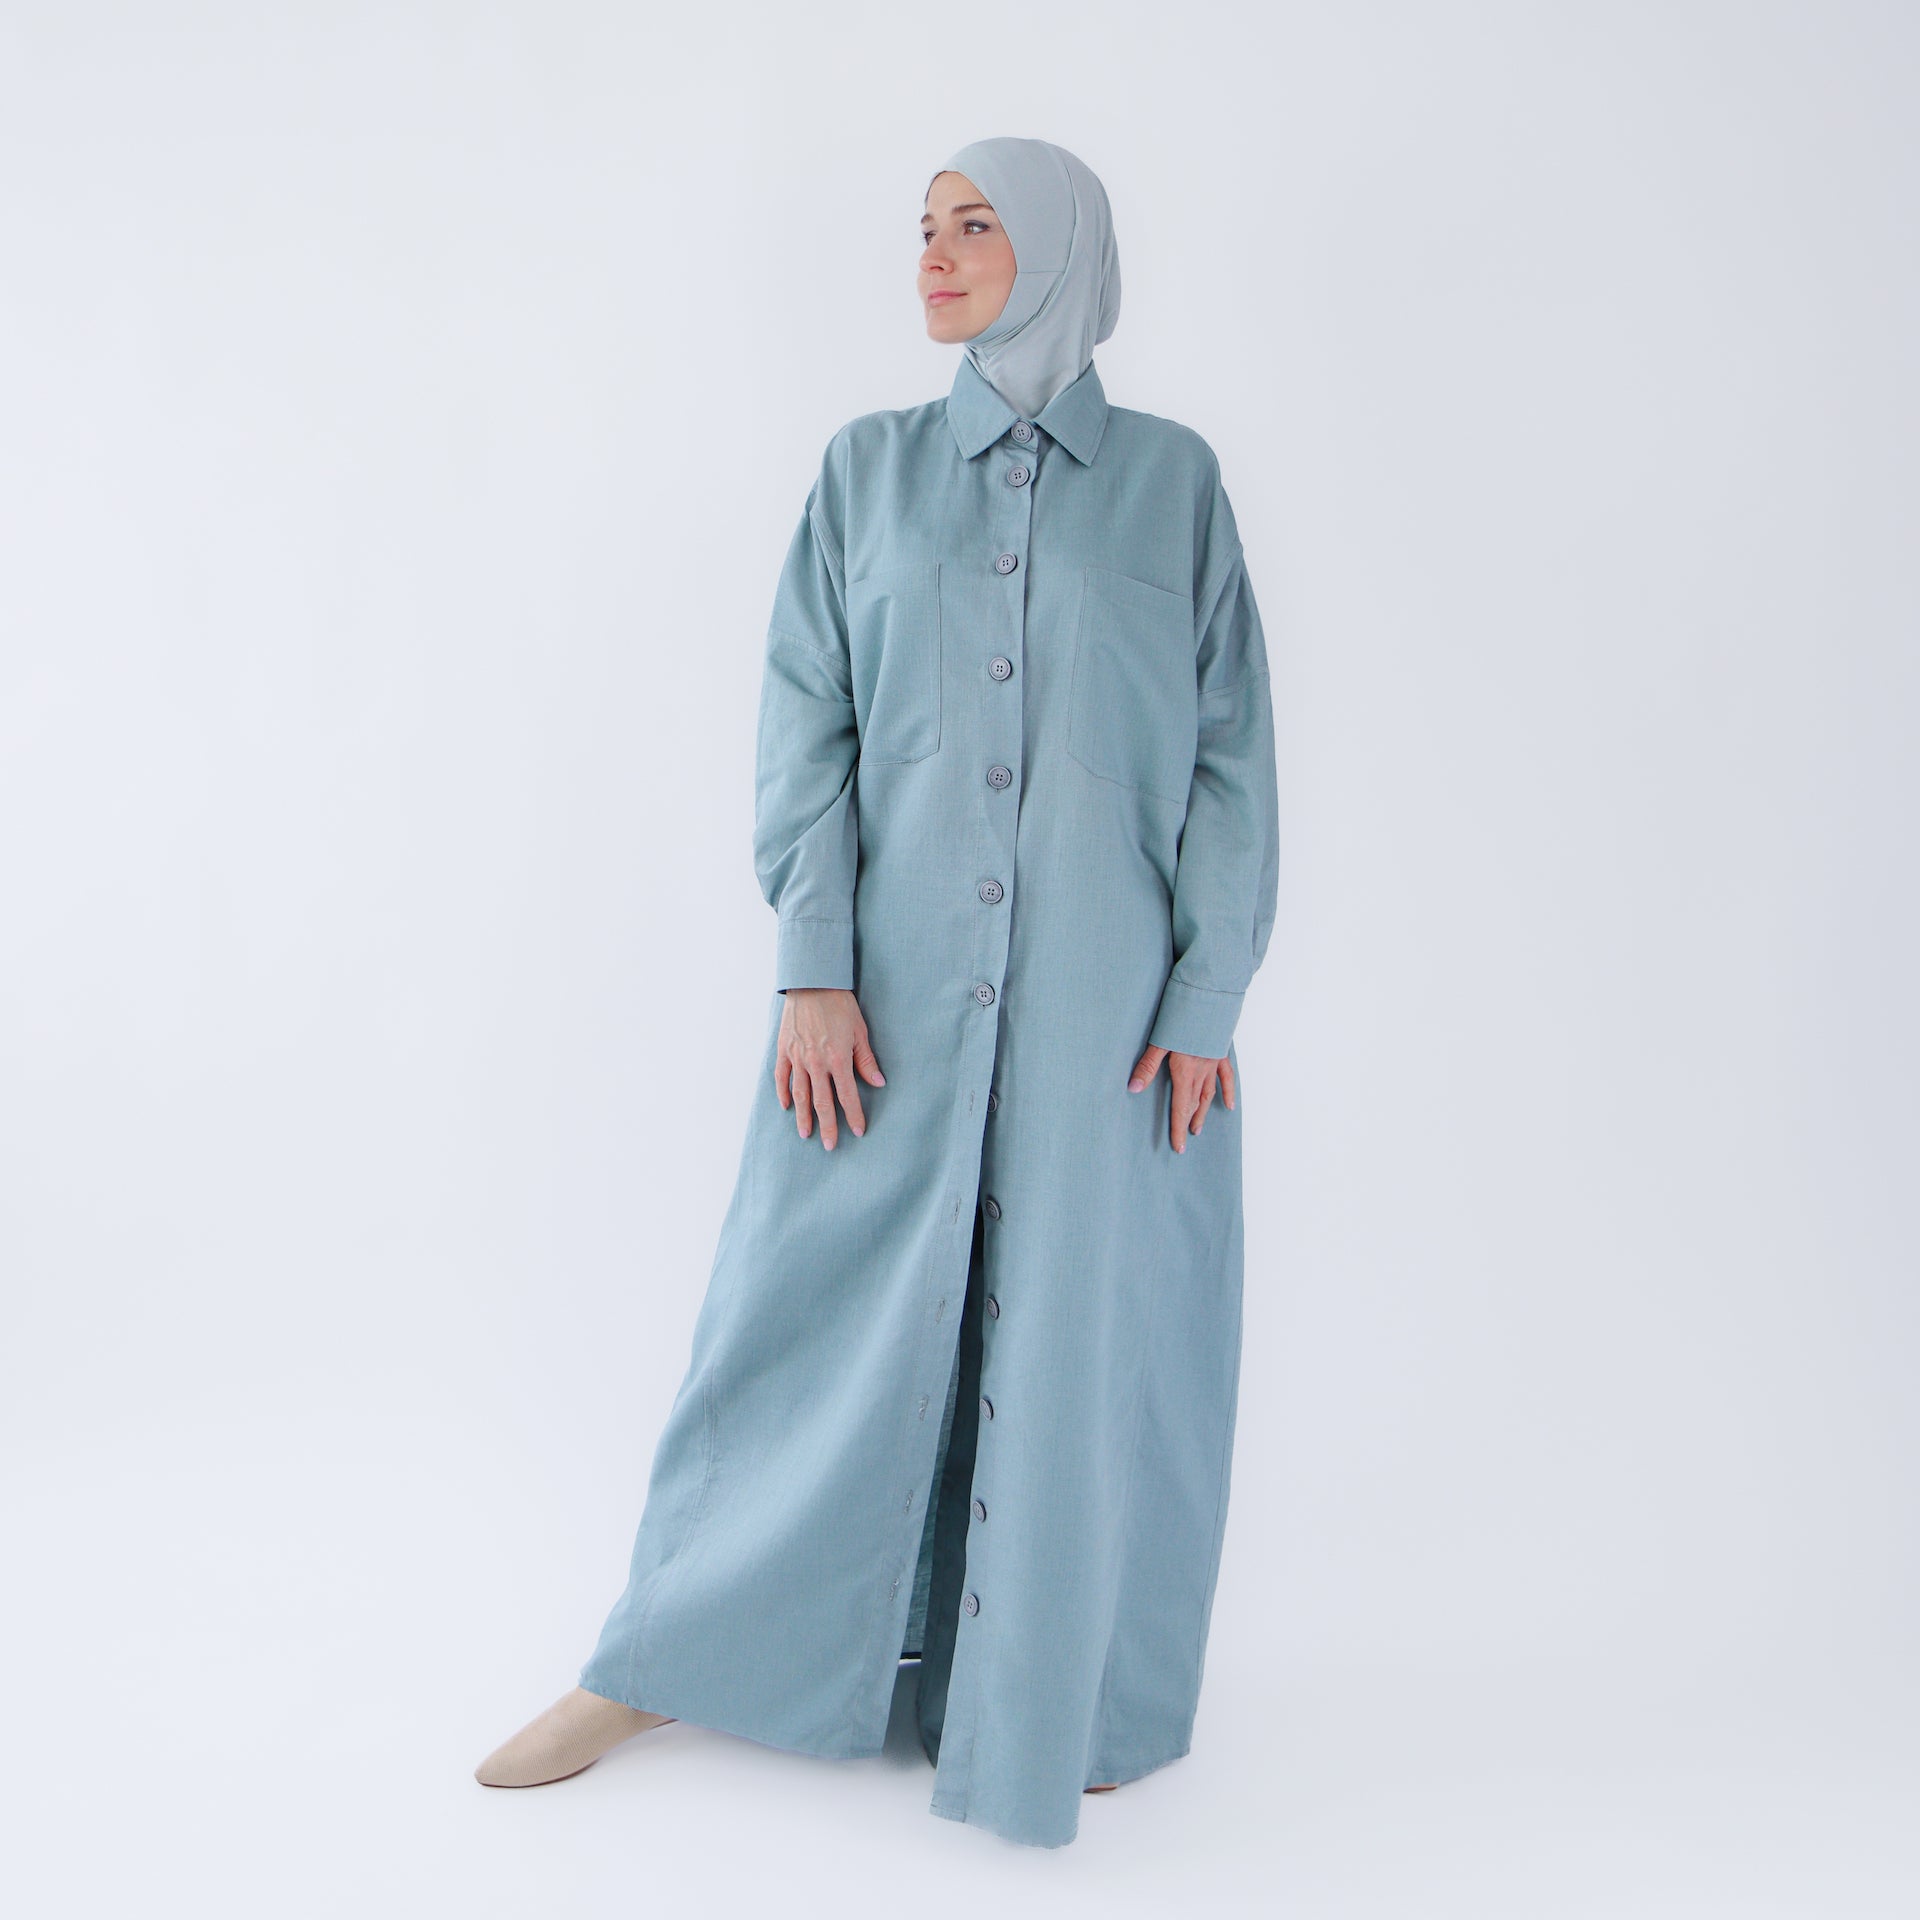 Abaya dress style maxi dress for women with wide trousers "Blue Linen"